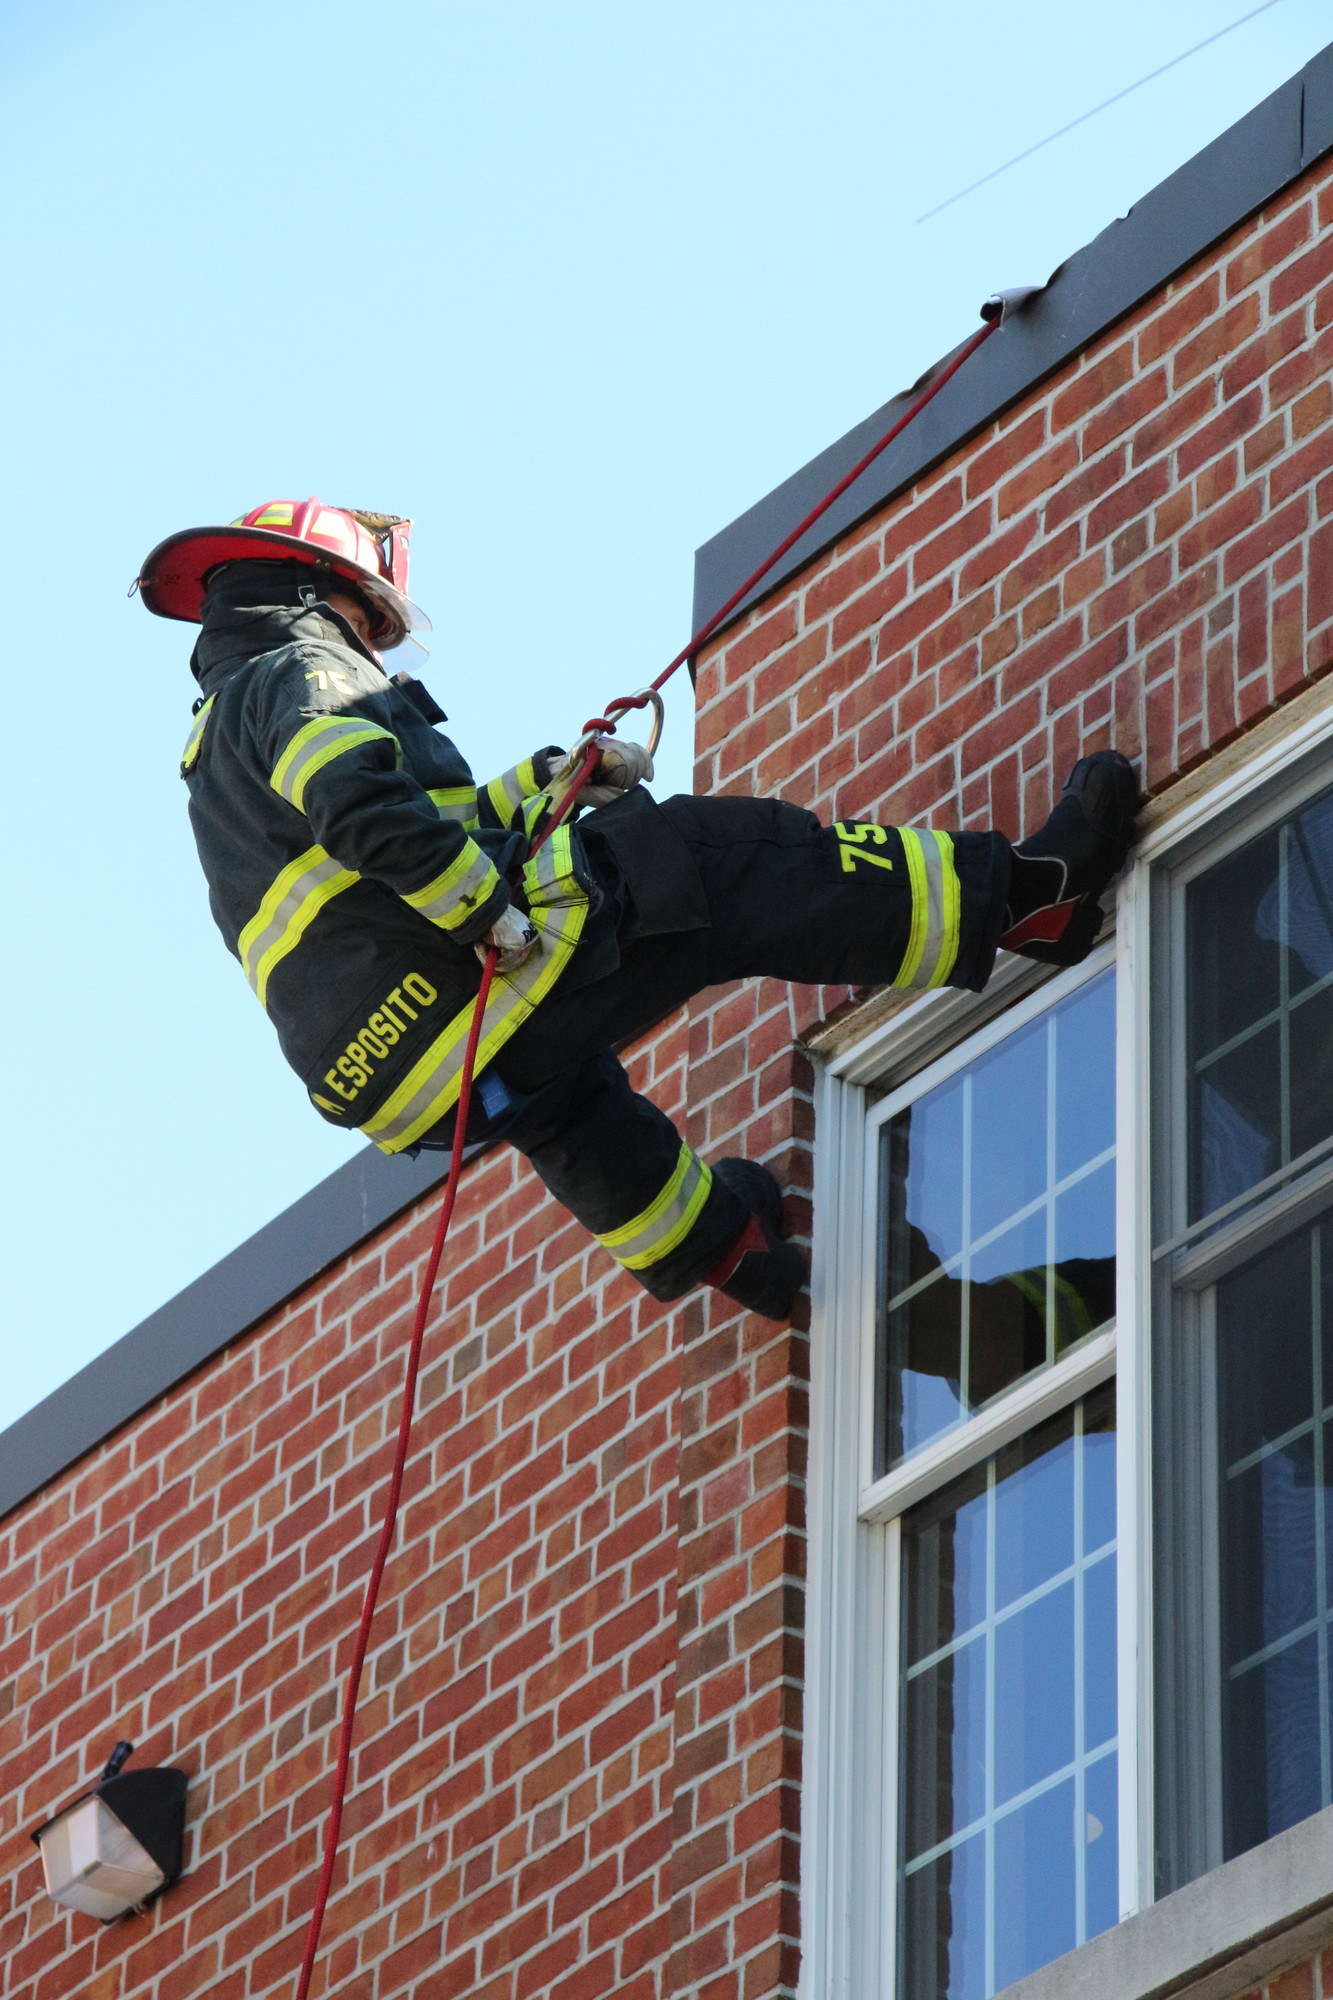 Fireman Michael Esposito demonstrated how firefighters rappel down the side of a building.